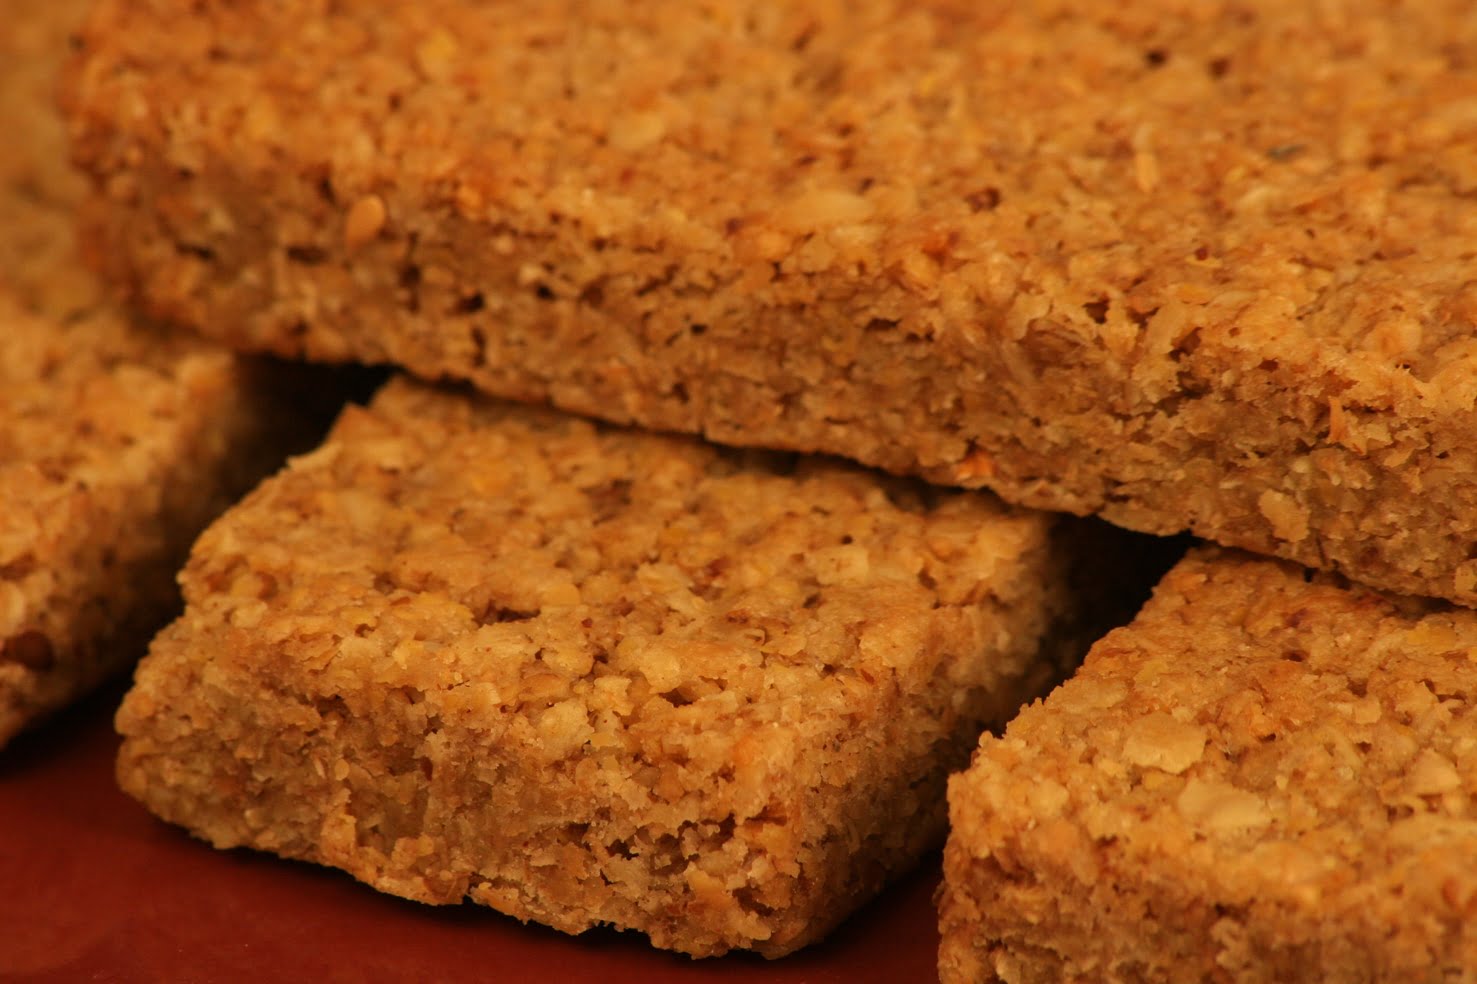 Recipe for delicious gluten-free healthy flapjacks with linseed, flax with suga-free and vegan options.